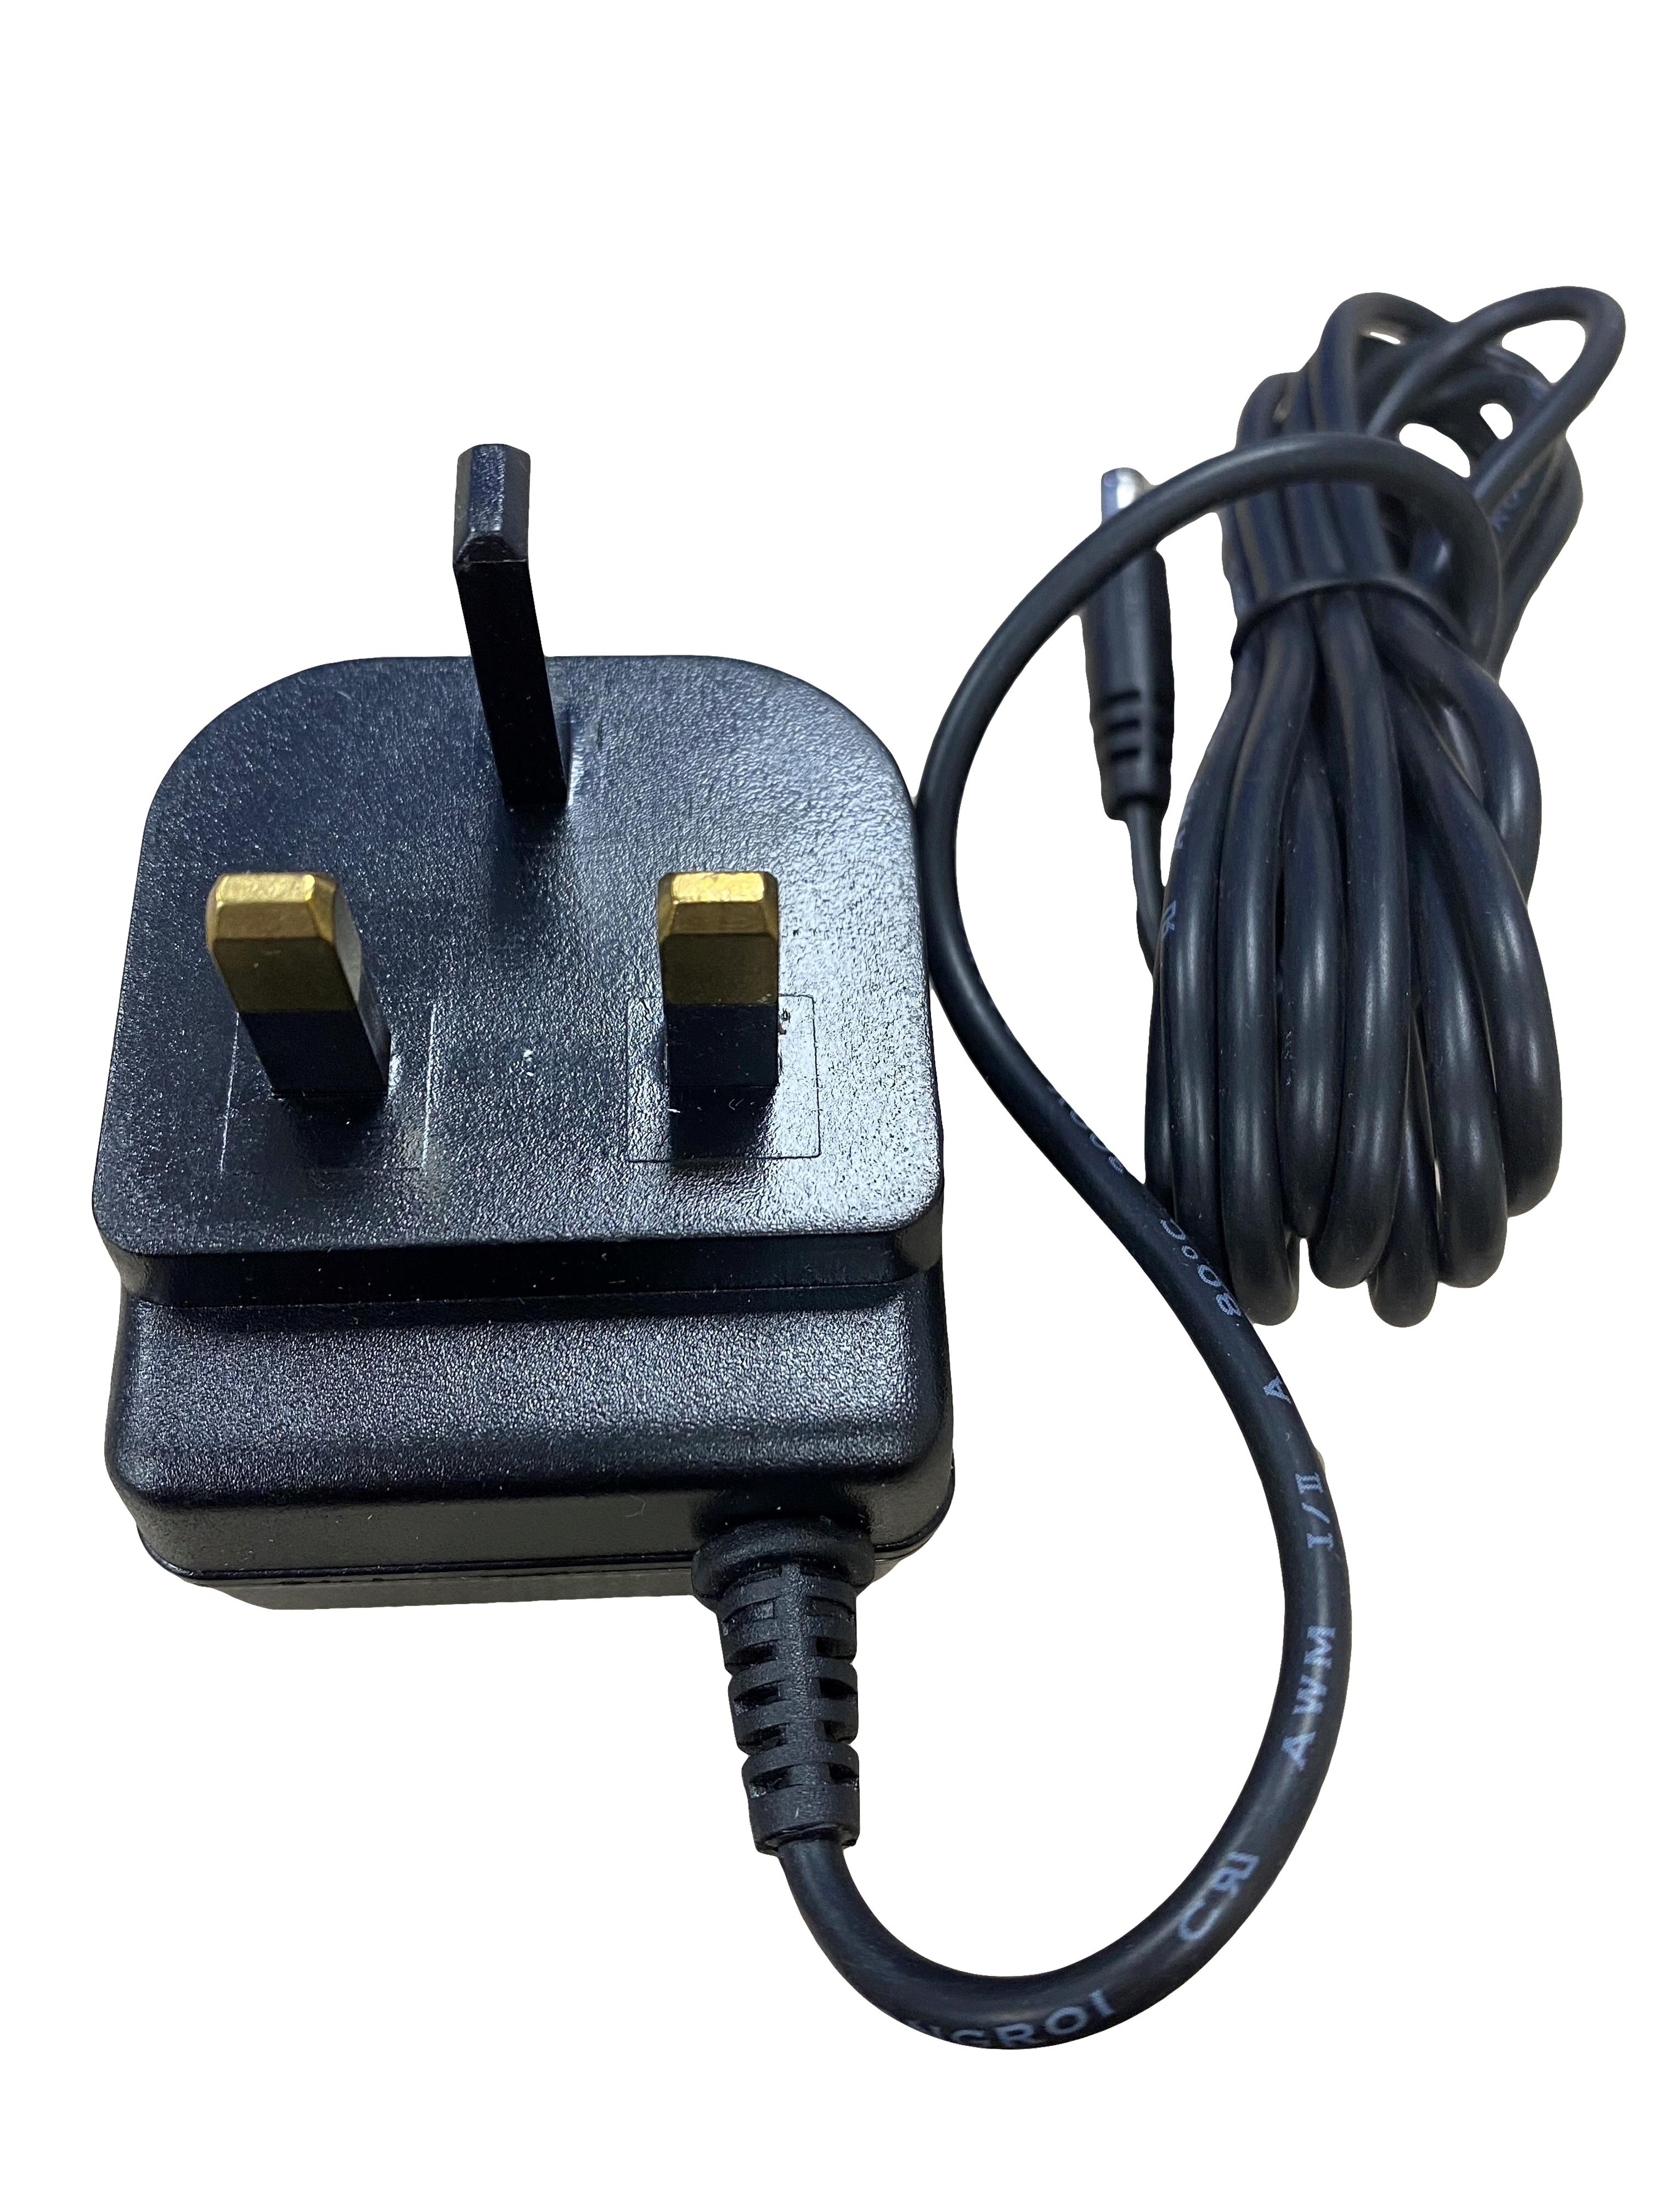 Replacement Power Supply: Cat Mate and Dog Mate Pet Fountain (949)